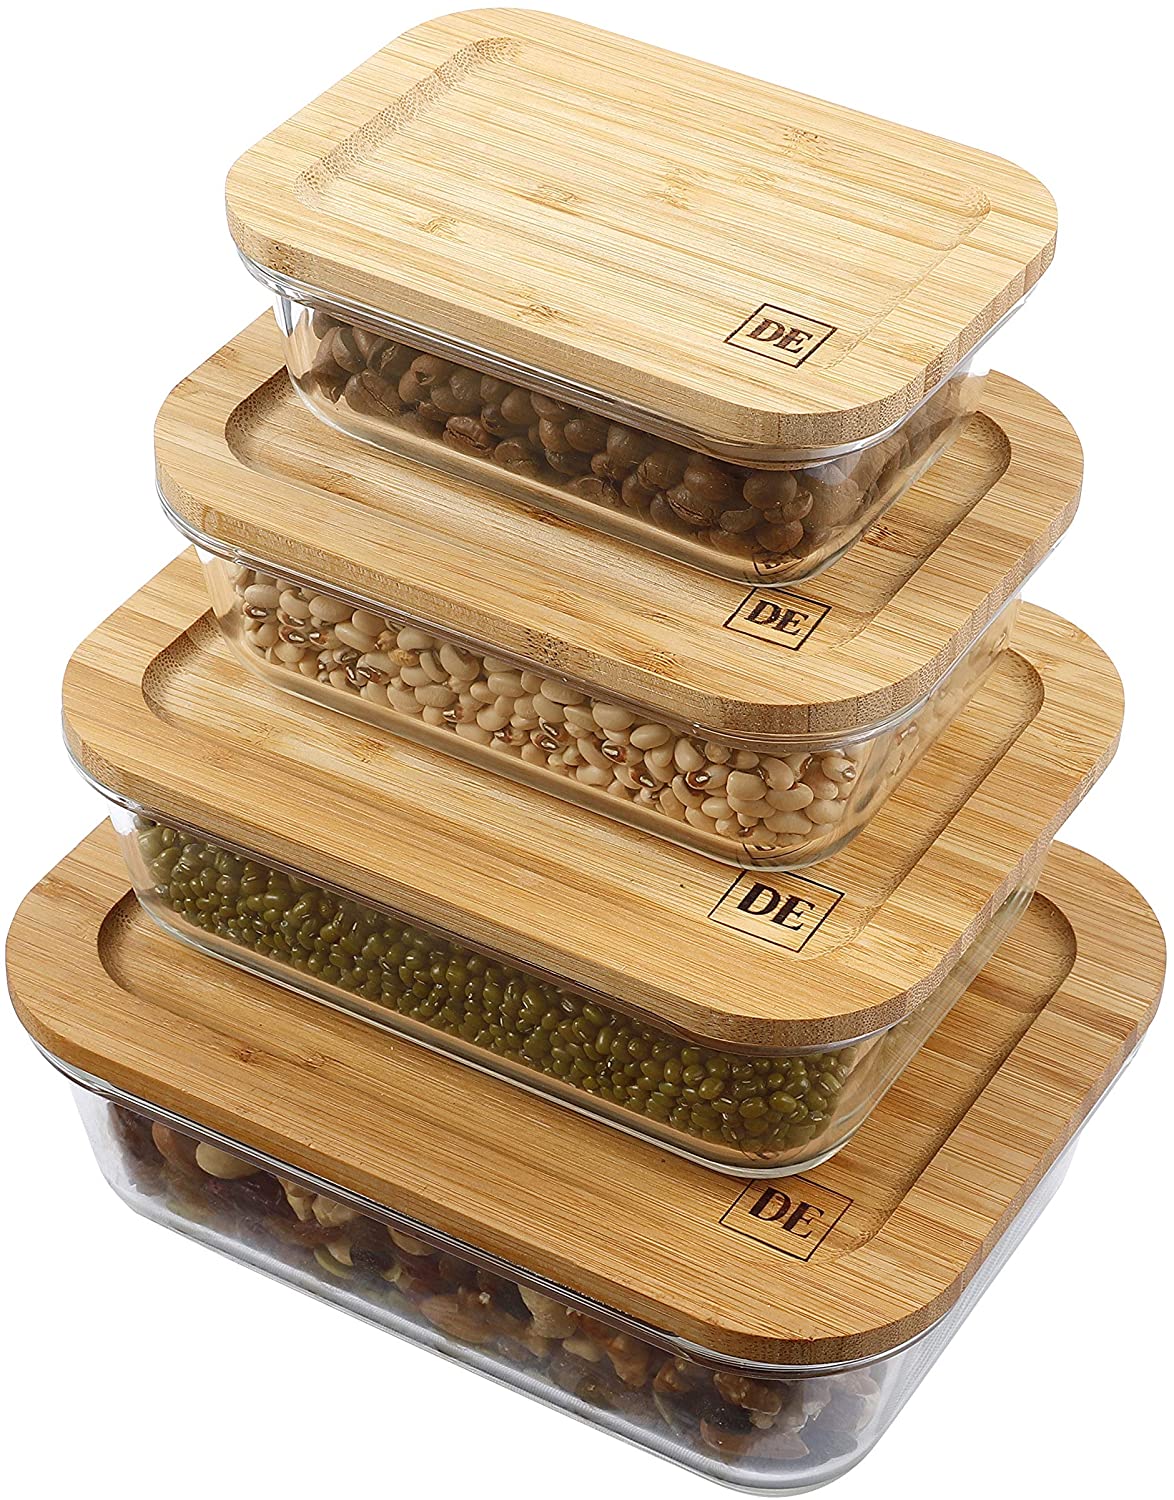 Glass food storage containers with bamboo lids filled with pantry staples, beans, dry ingredients, seeds etc.